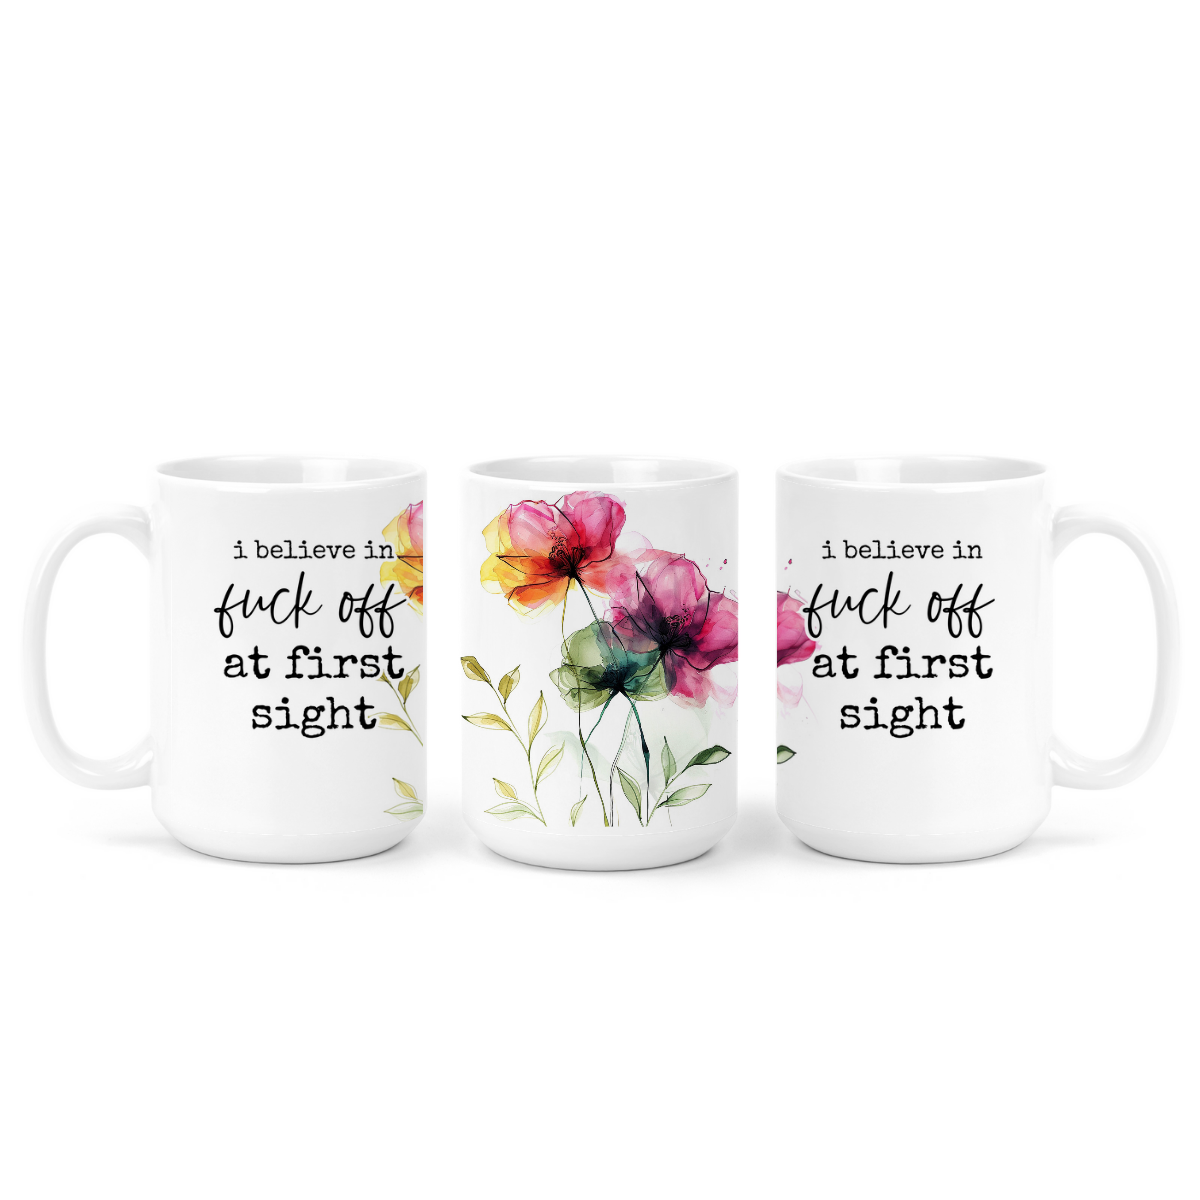 I Believe In Fuck Off At First Sight | Mug - The Pretty Things.ca